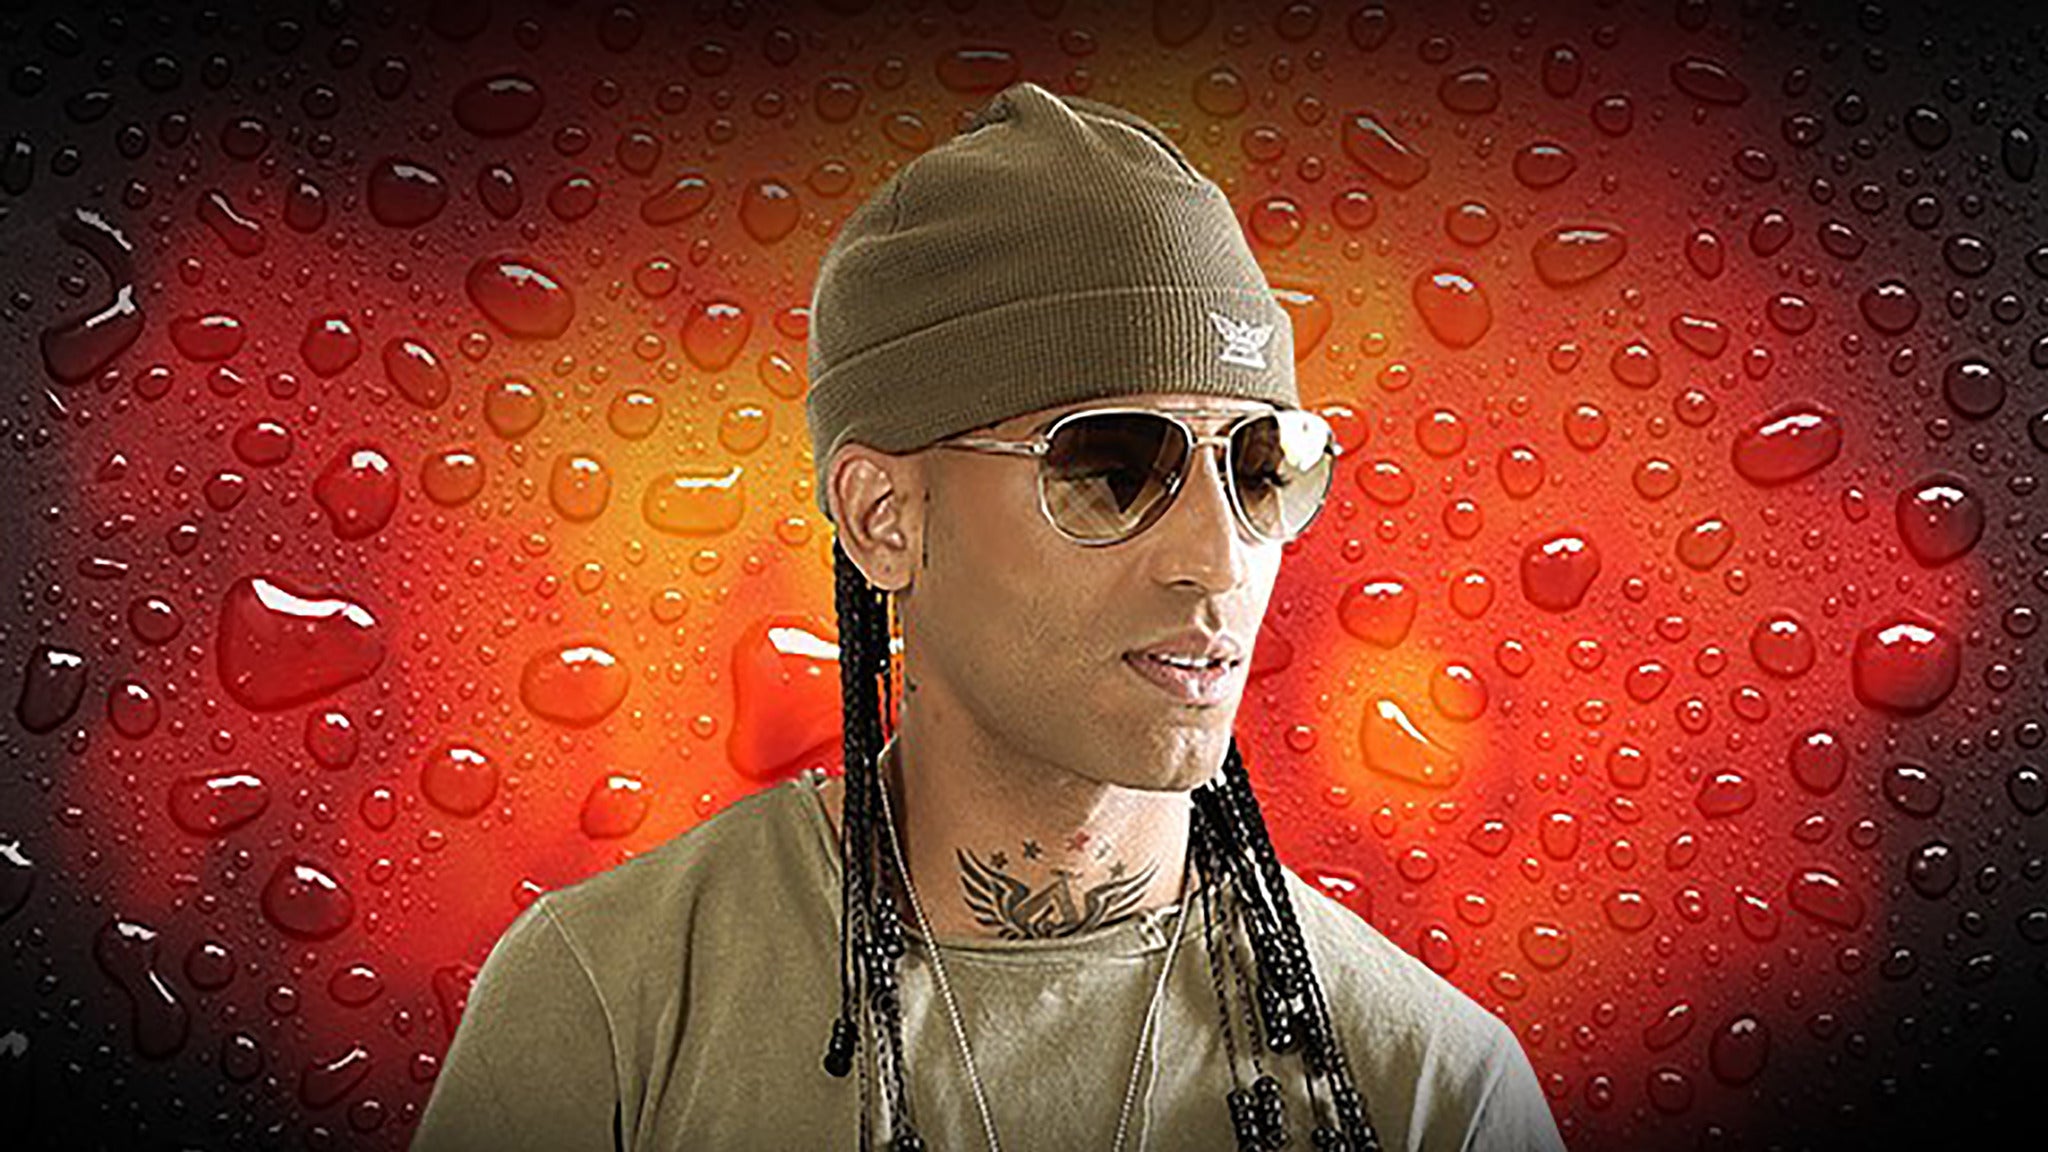 Arcangel in Houston promo photo for Discount 10% off presale offer code